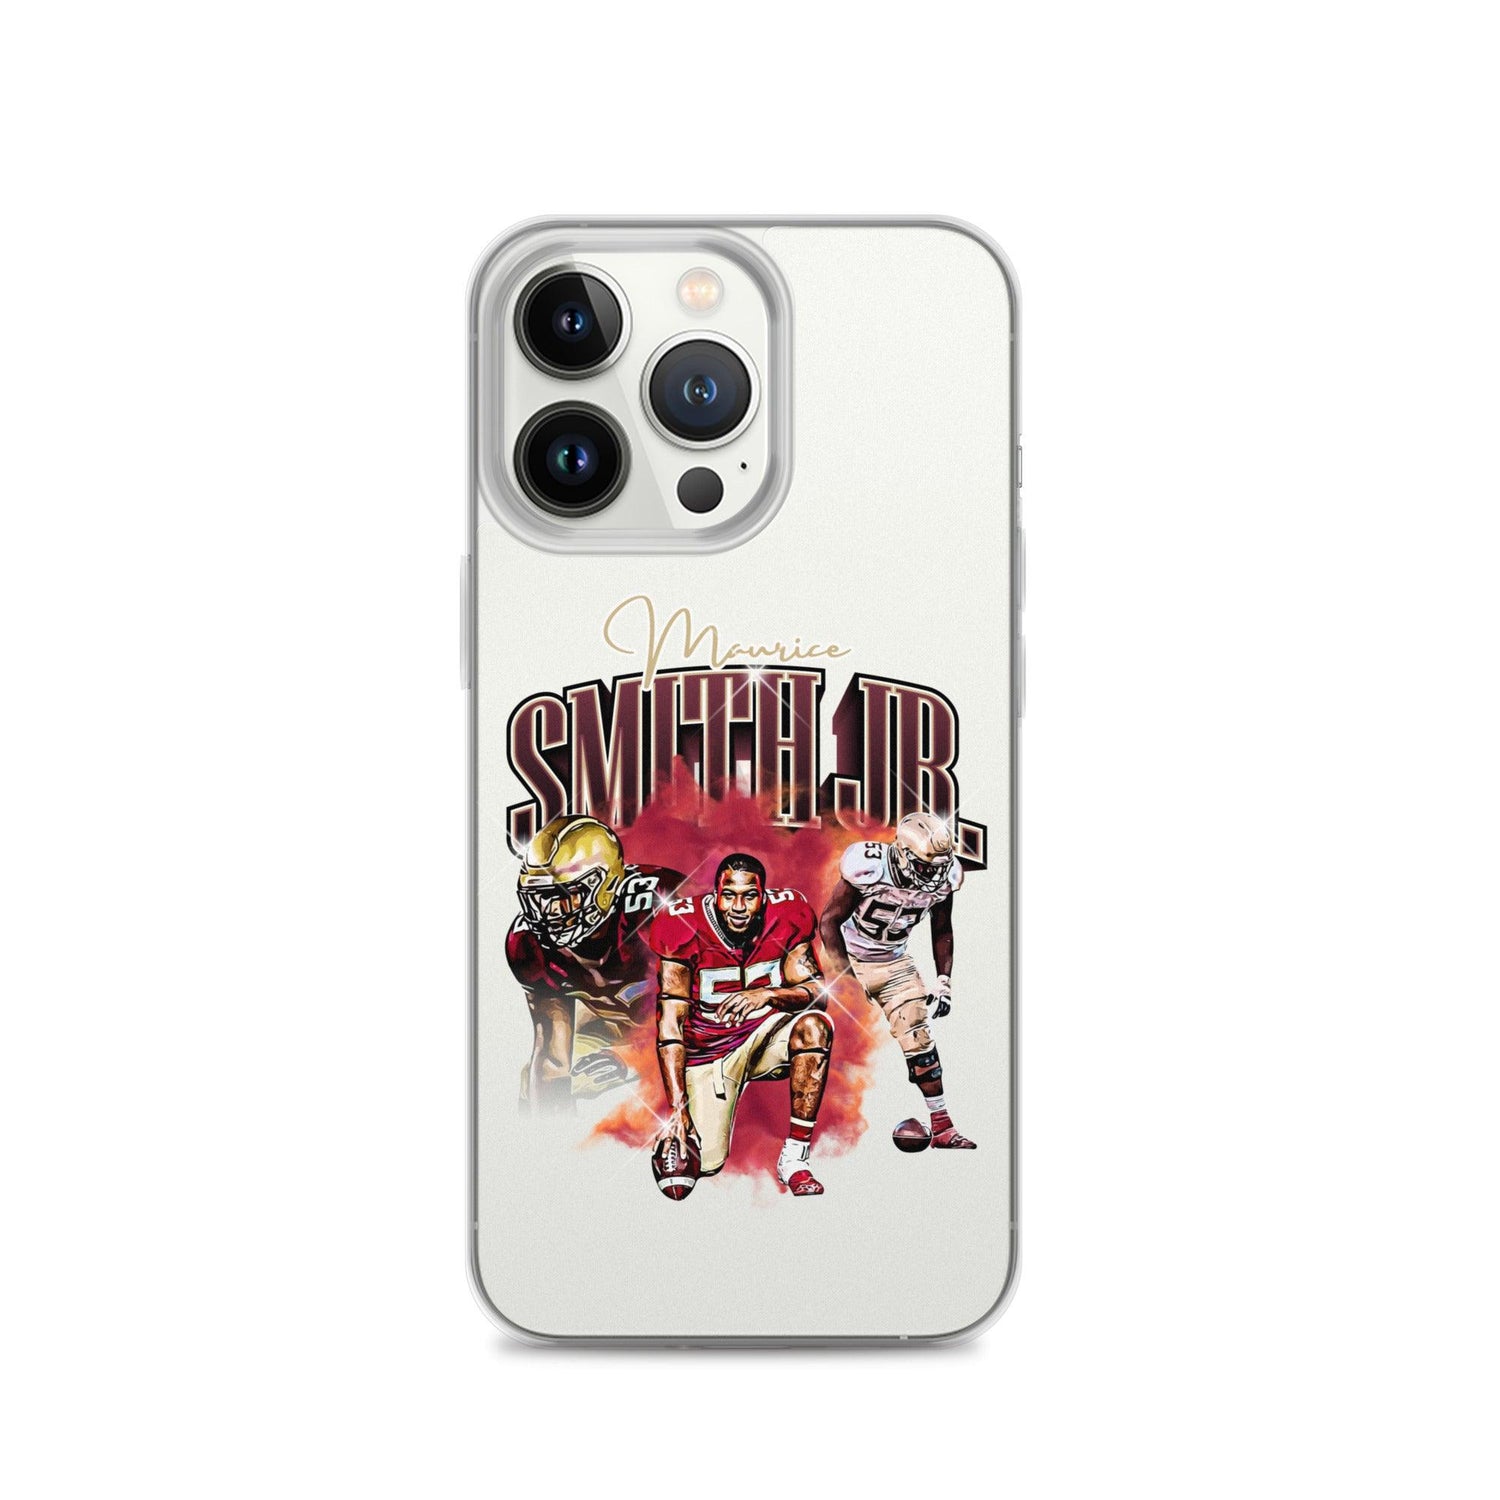 Maurice Smith Jr. "Legacy" iPhone Case - Fan Arch